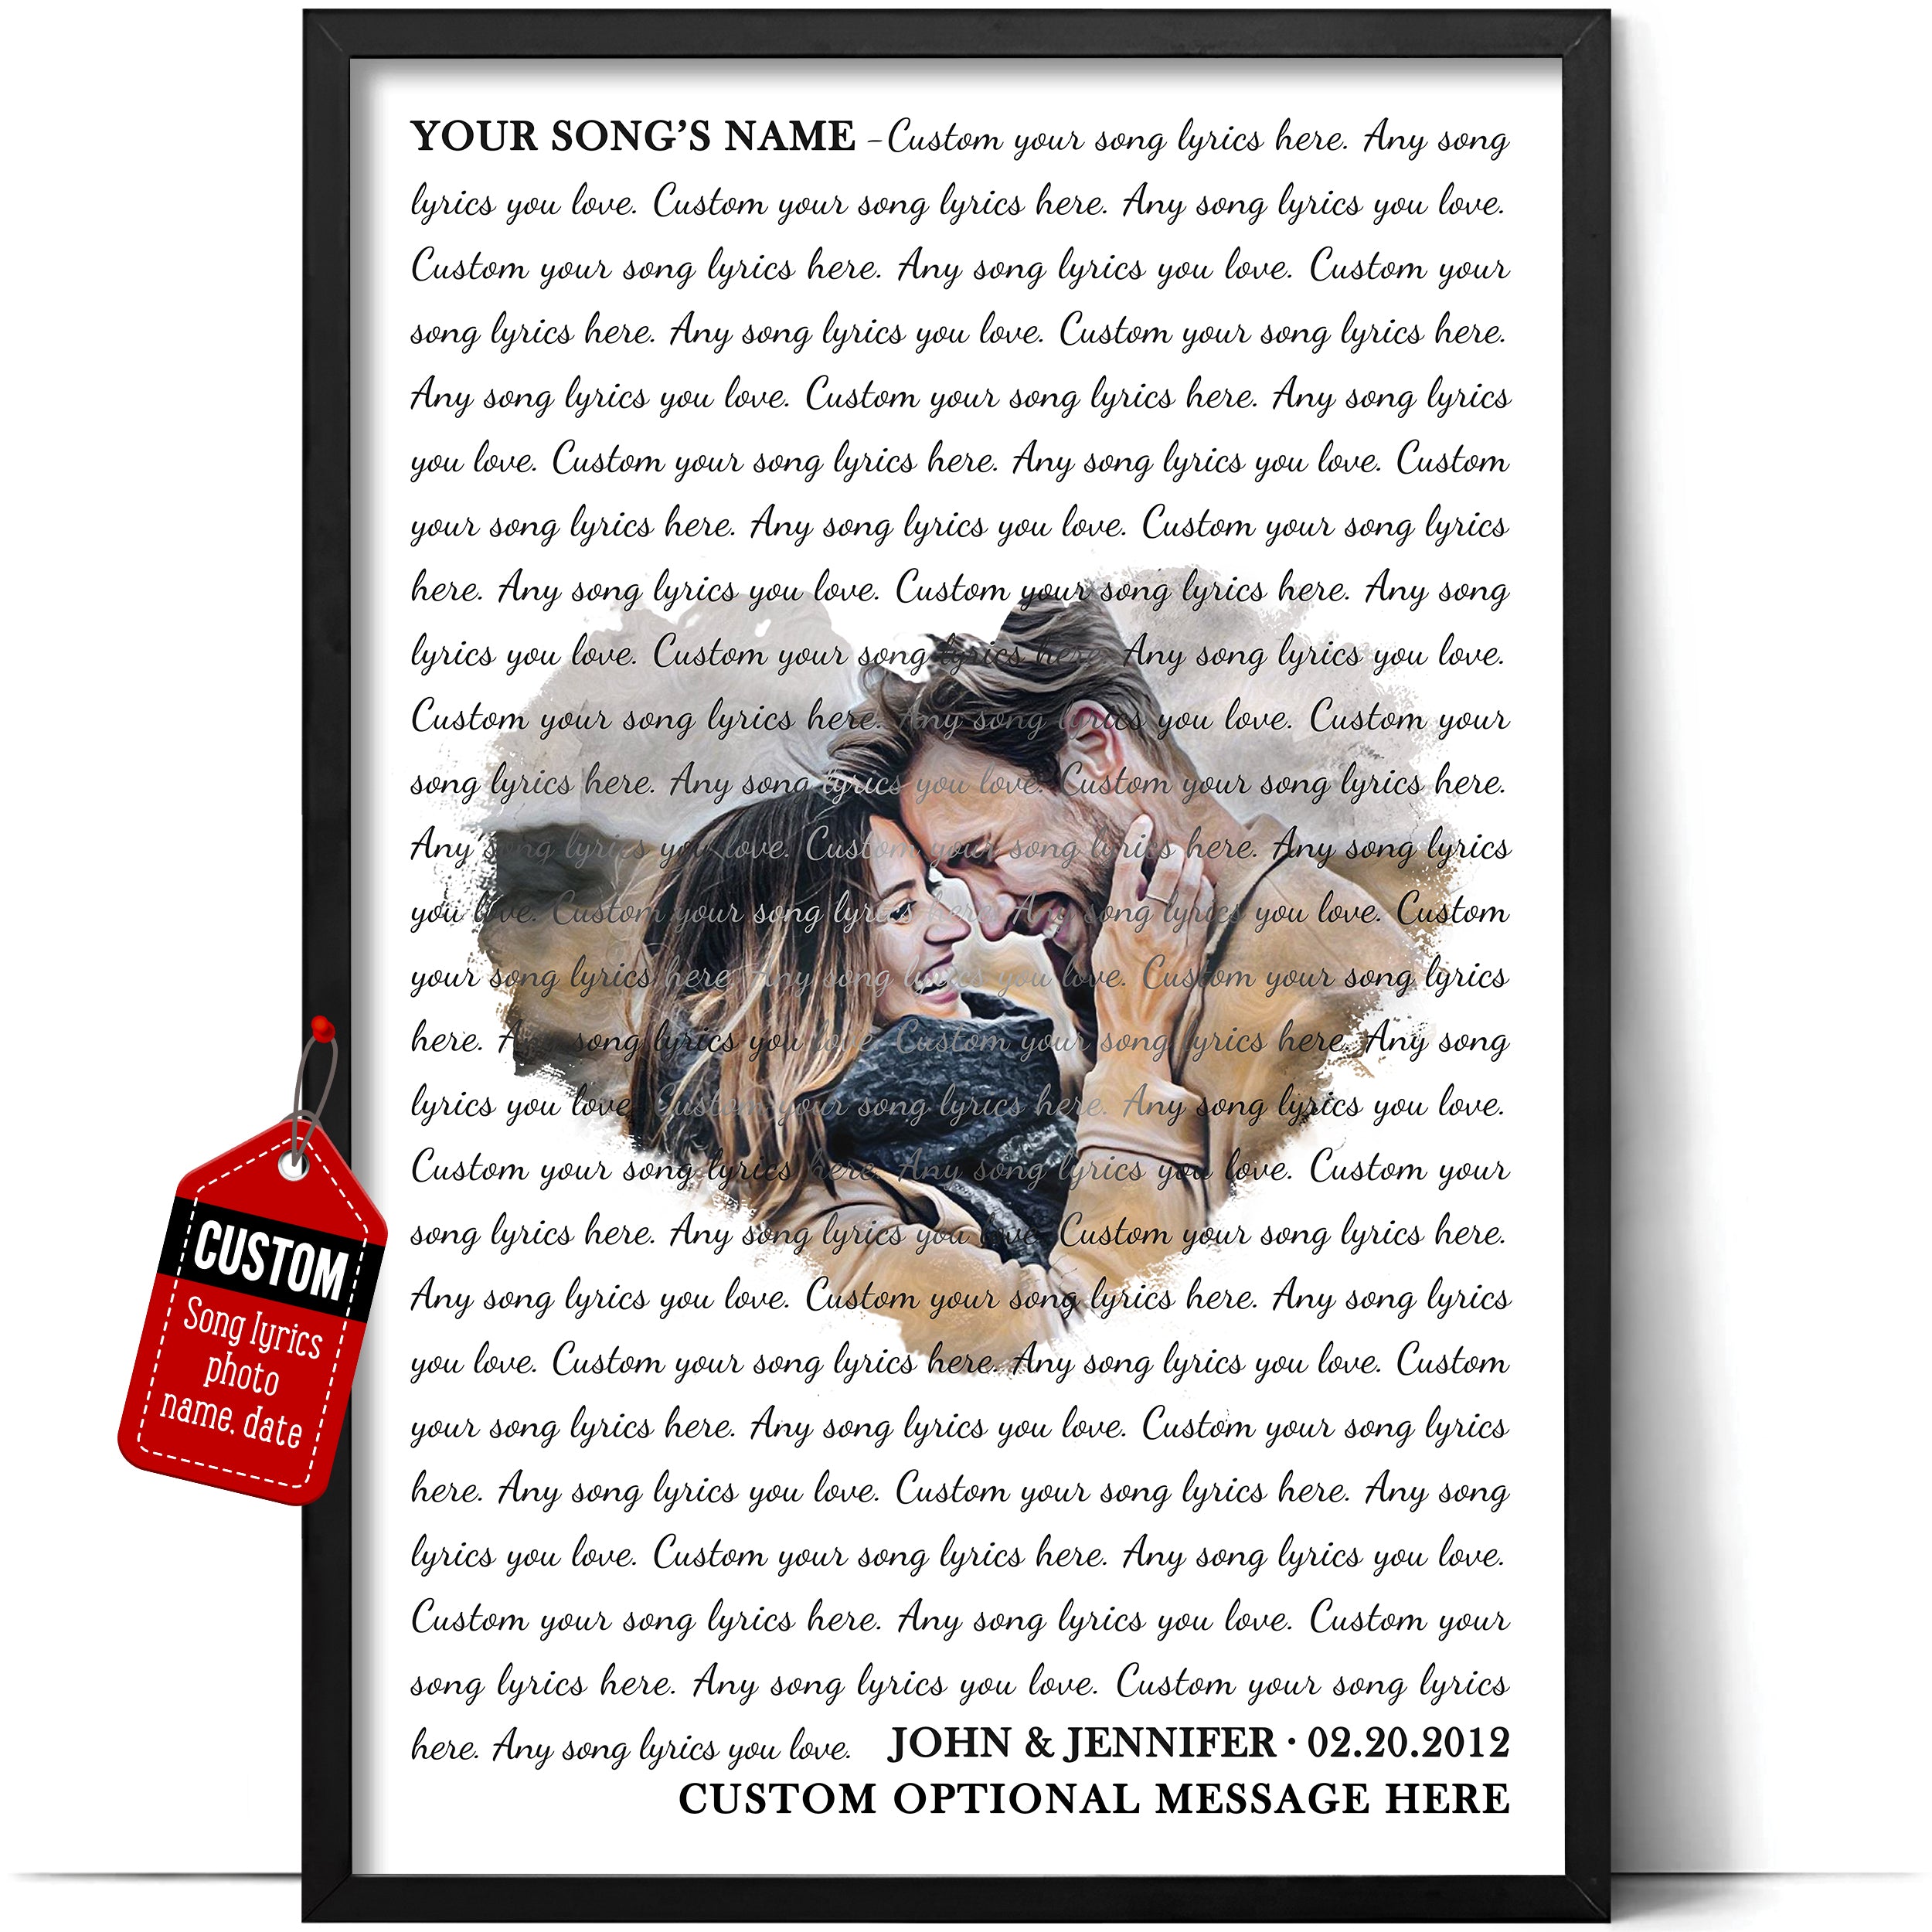 Customized Song Lyrics Poster Photo Couples Gifts for Boyfriend from Girlfriend - Perfect Song Chords Couple One Year Anniversary - Personalized Music Canvas Framed Couple Gifts for Him